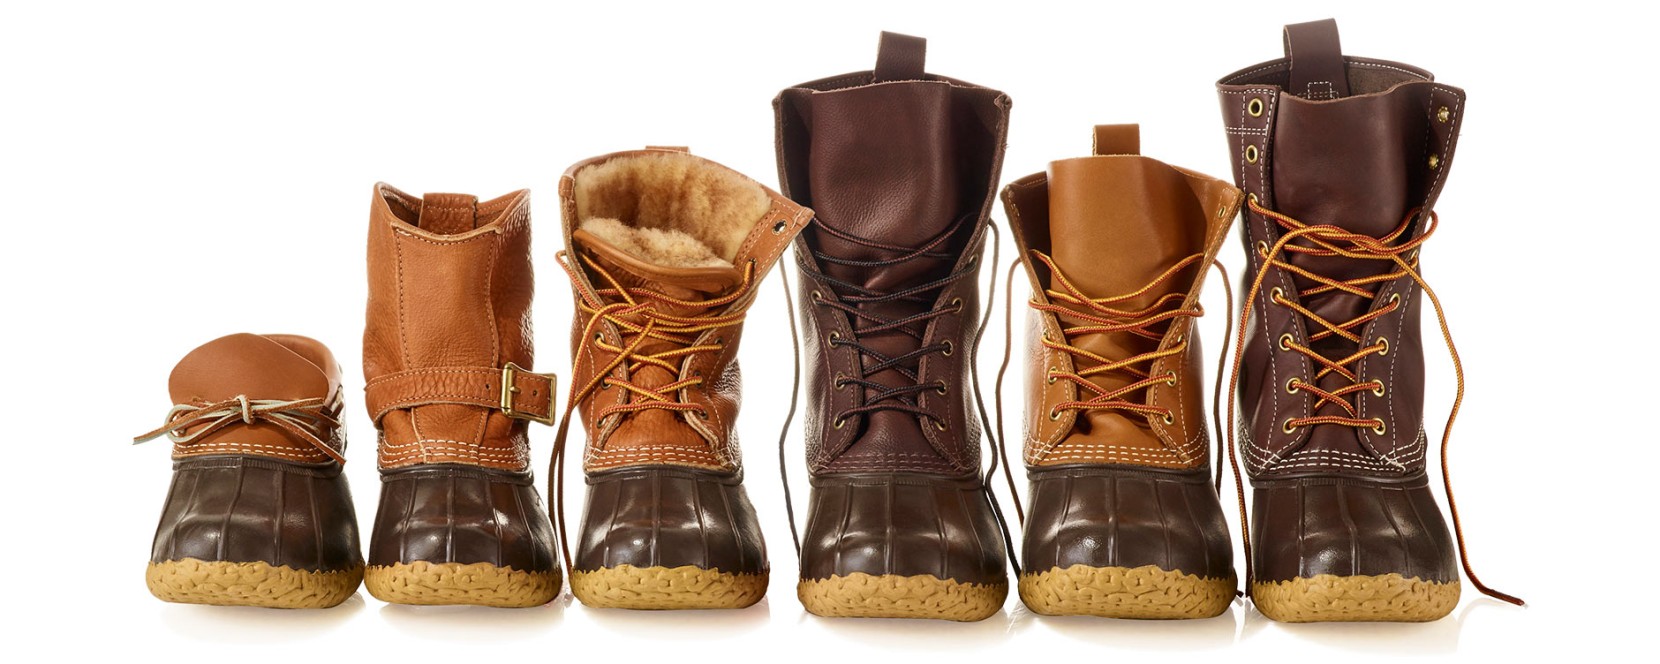 L.L.Bean Boots. We handcraft our L.L.Bean Boots in the USA. Maine to be exact - and we do it one pair at a time using the finest leather and waterproof rubber. 